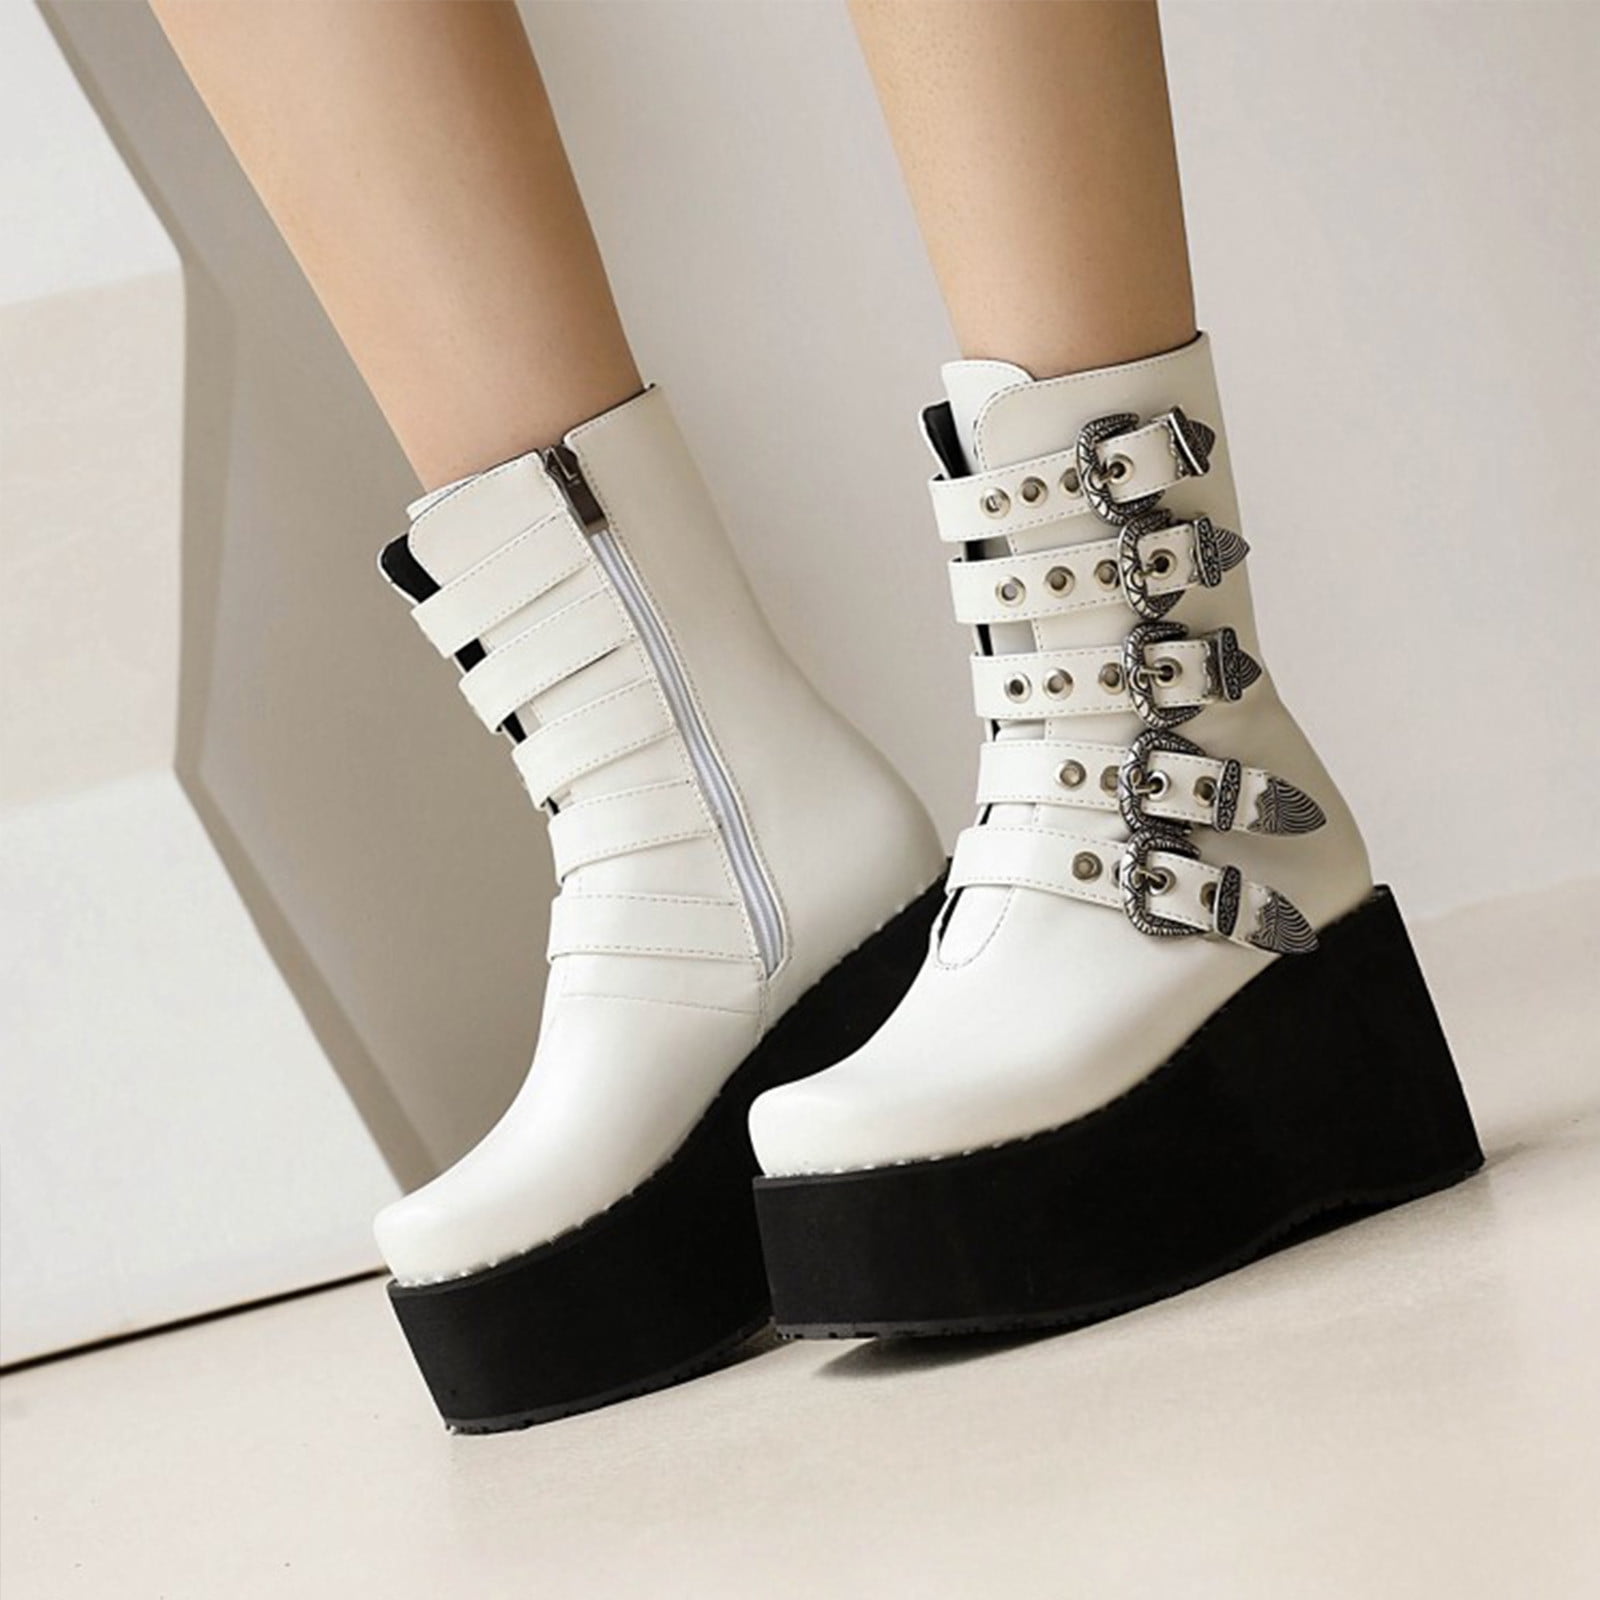 Ladies Platform Chunky High Heel Pull On Ankle Boots Pointed Toe Punk Goth Shoes 